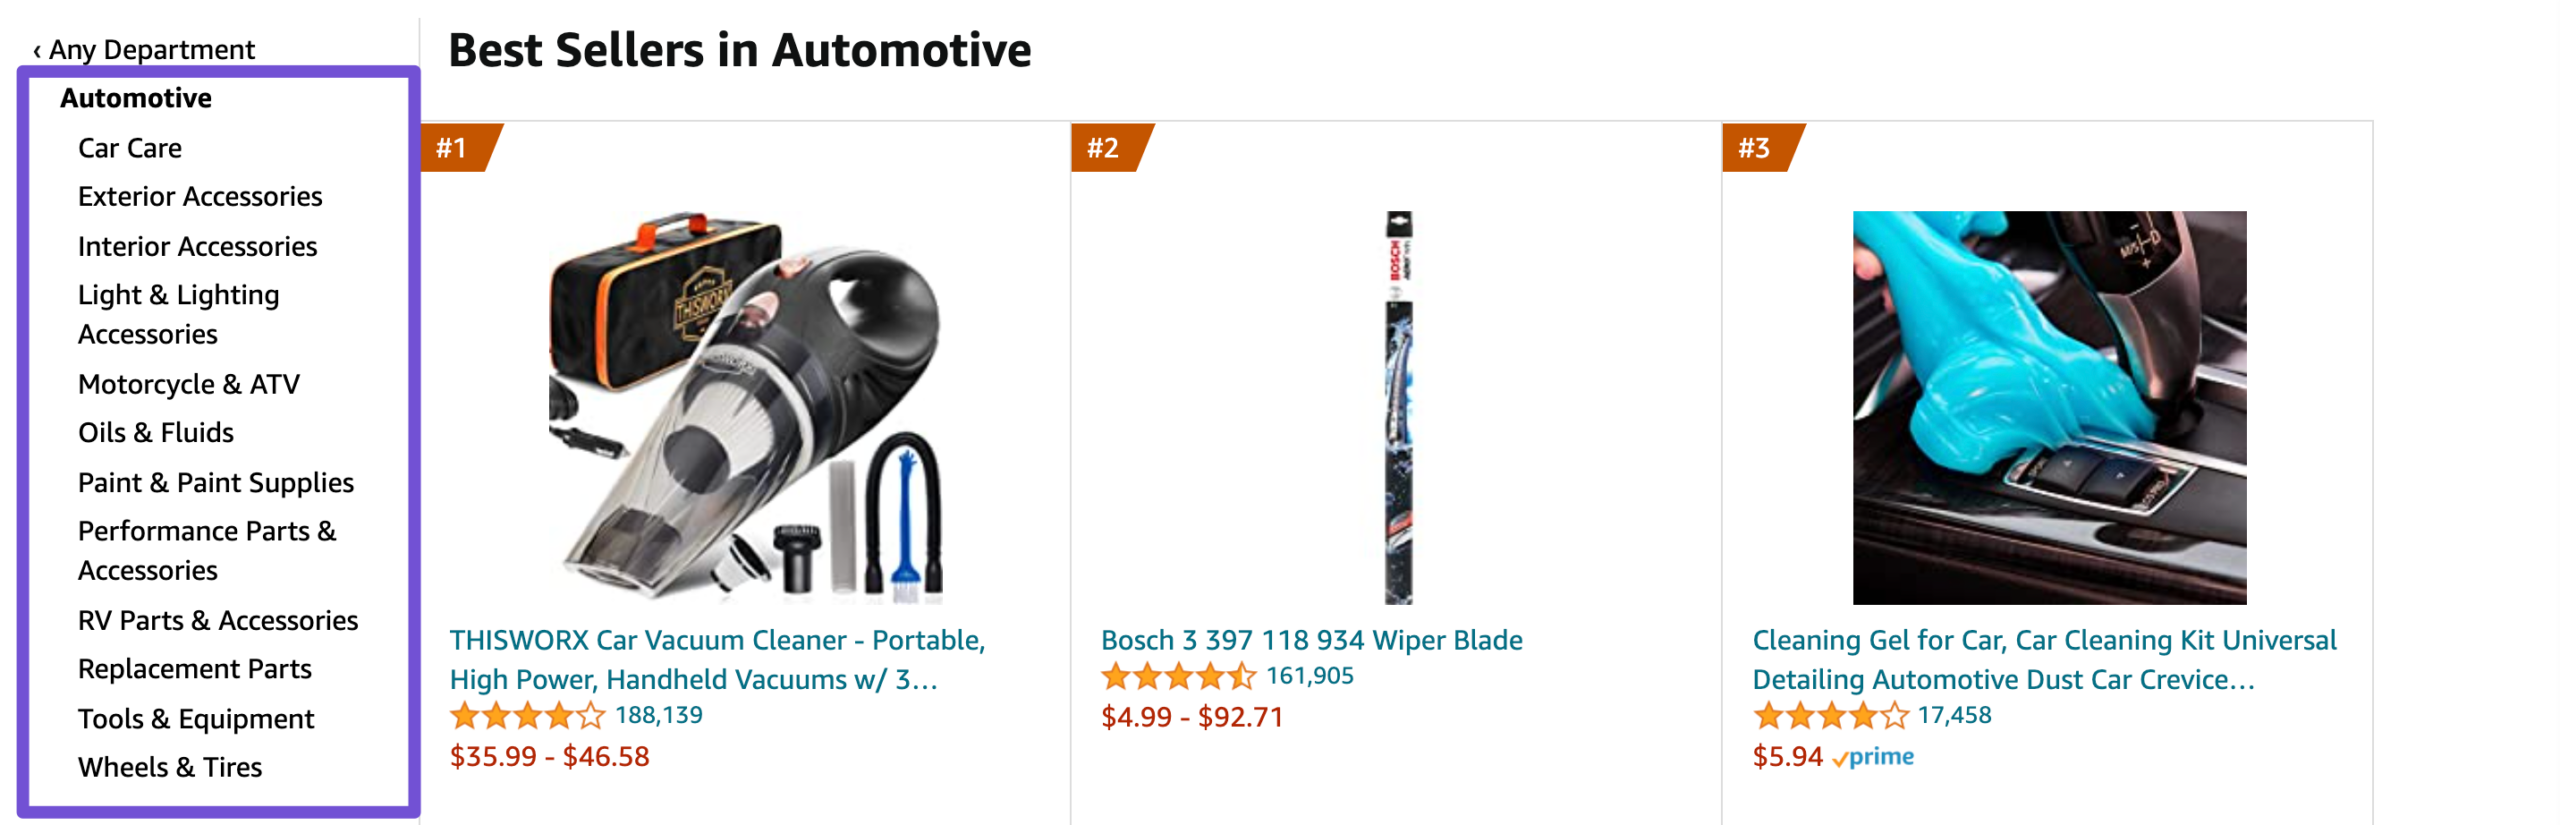 amazon best sellers in automotive category